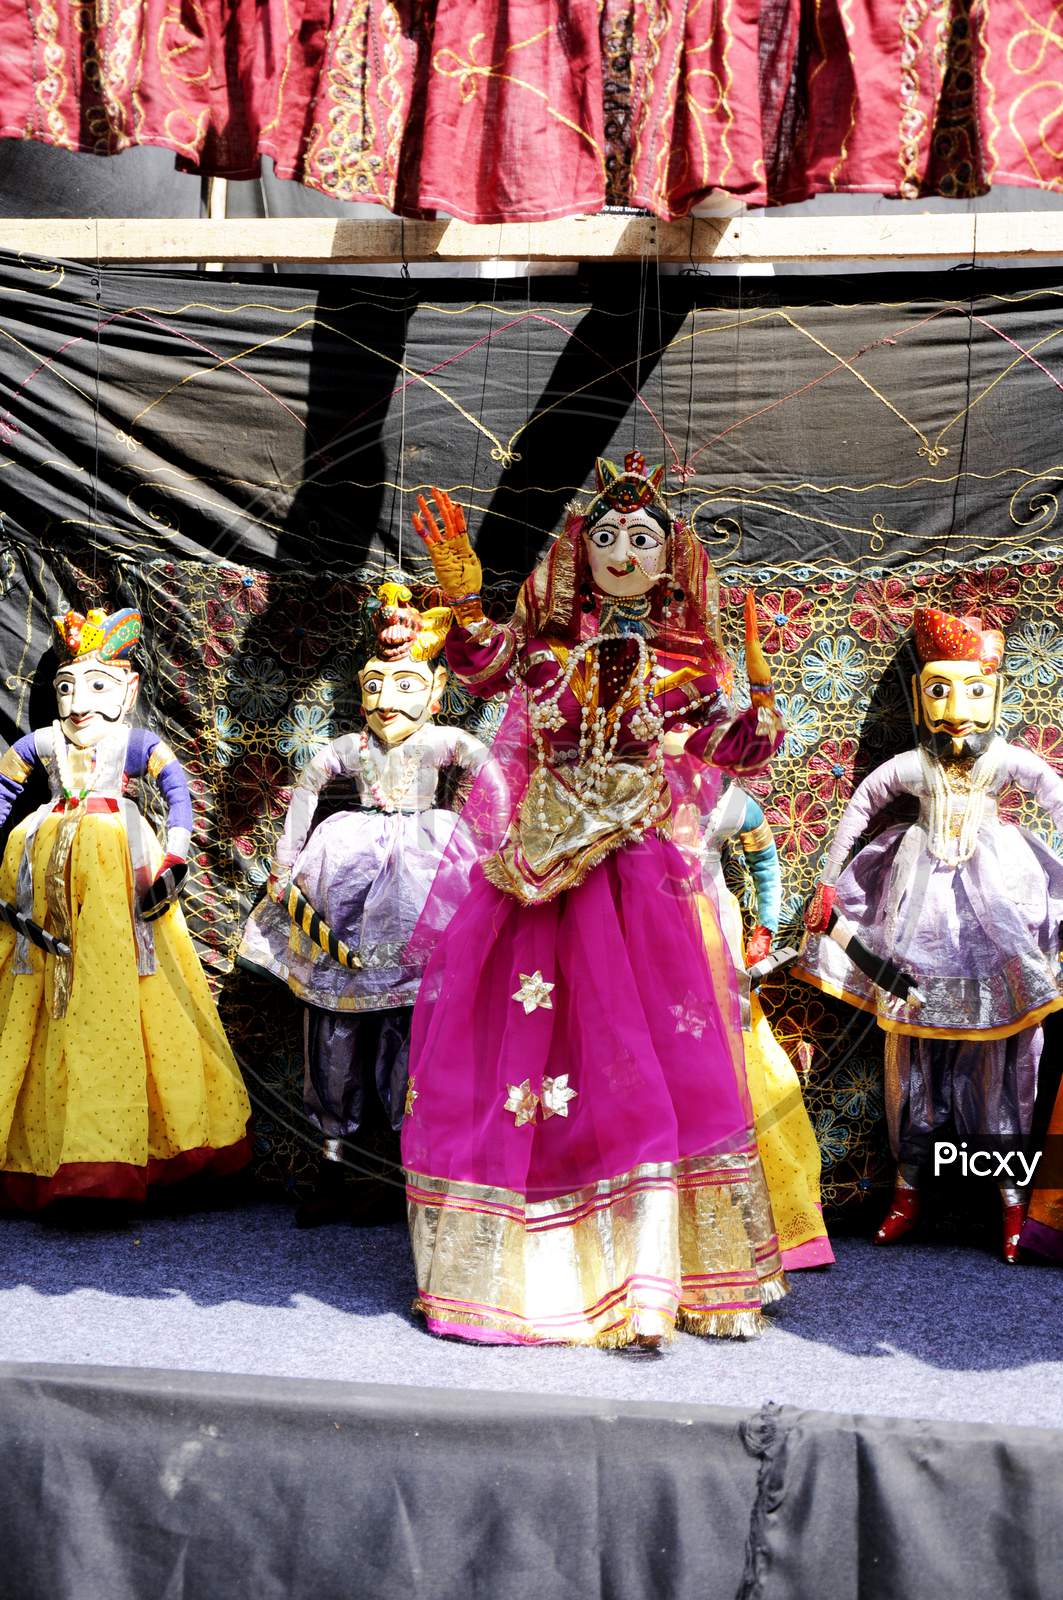 Colorful Rajasthani Puppet Dolls Of Jaisalmer. Traditional Puppet Shows In Rajasthan Is A Popular Tourist Attraction.